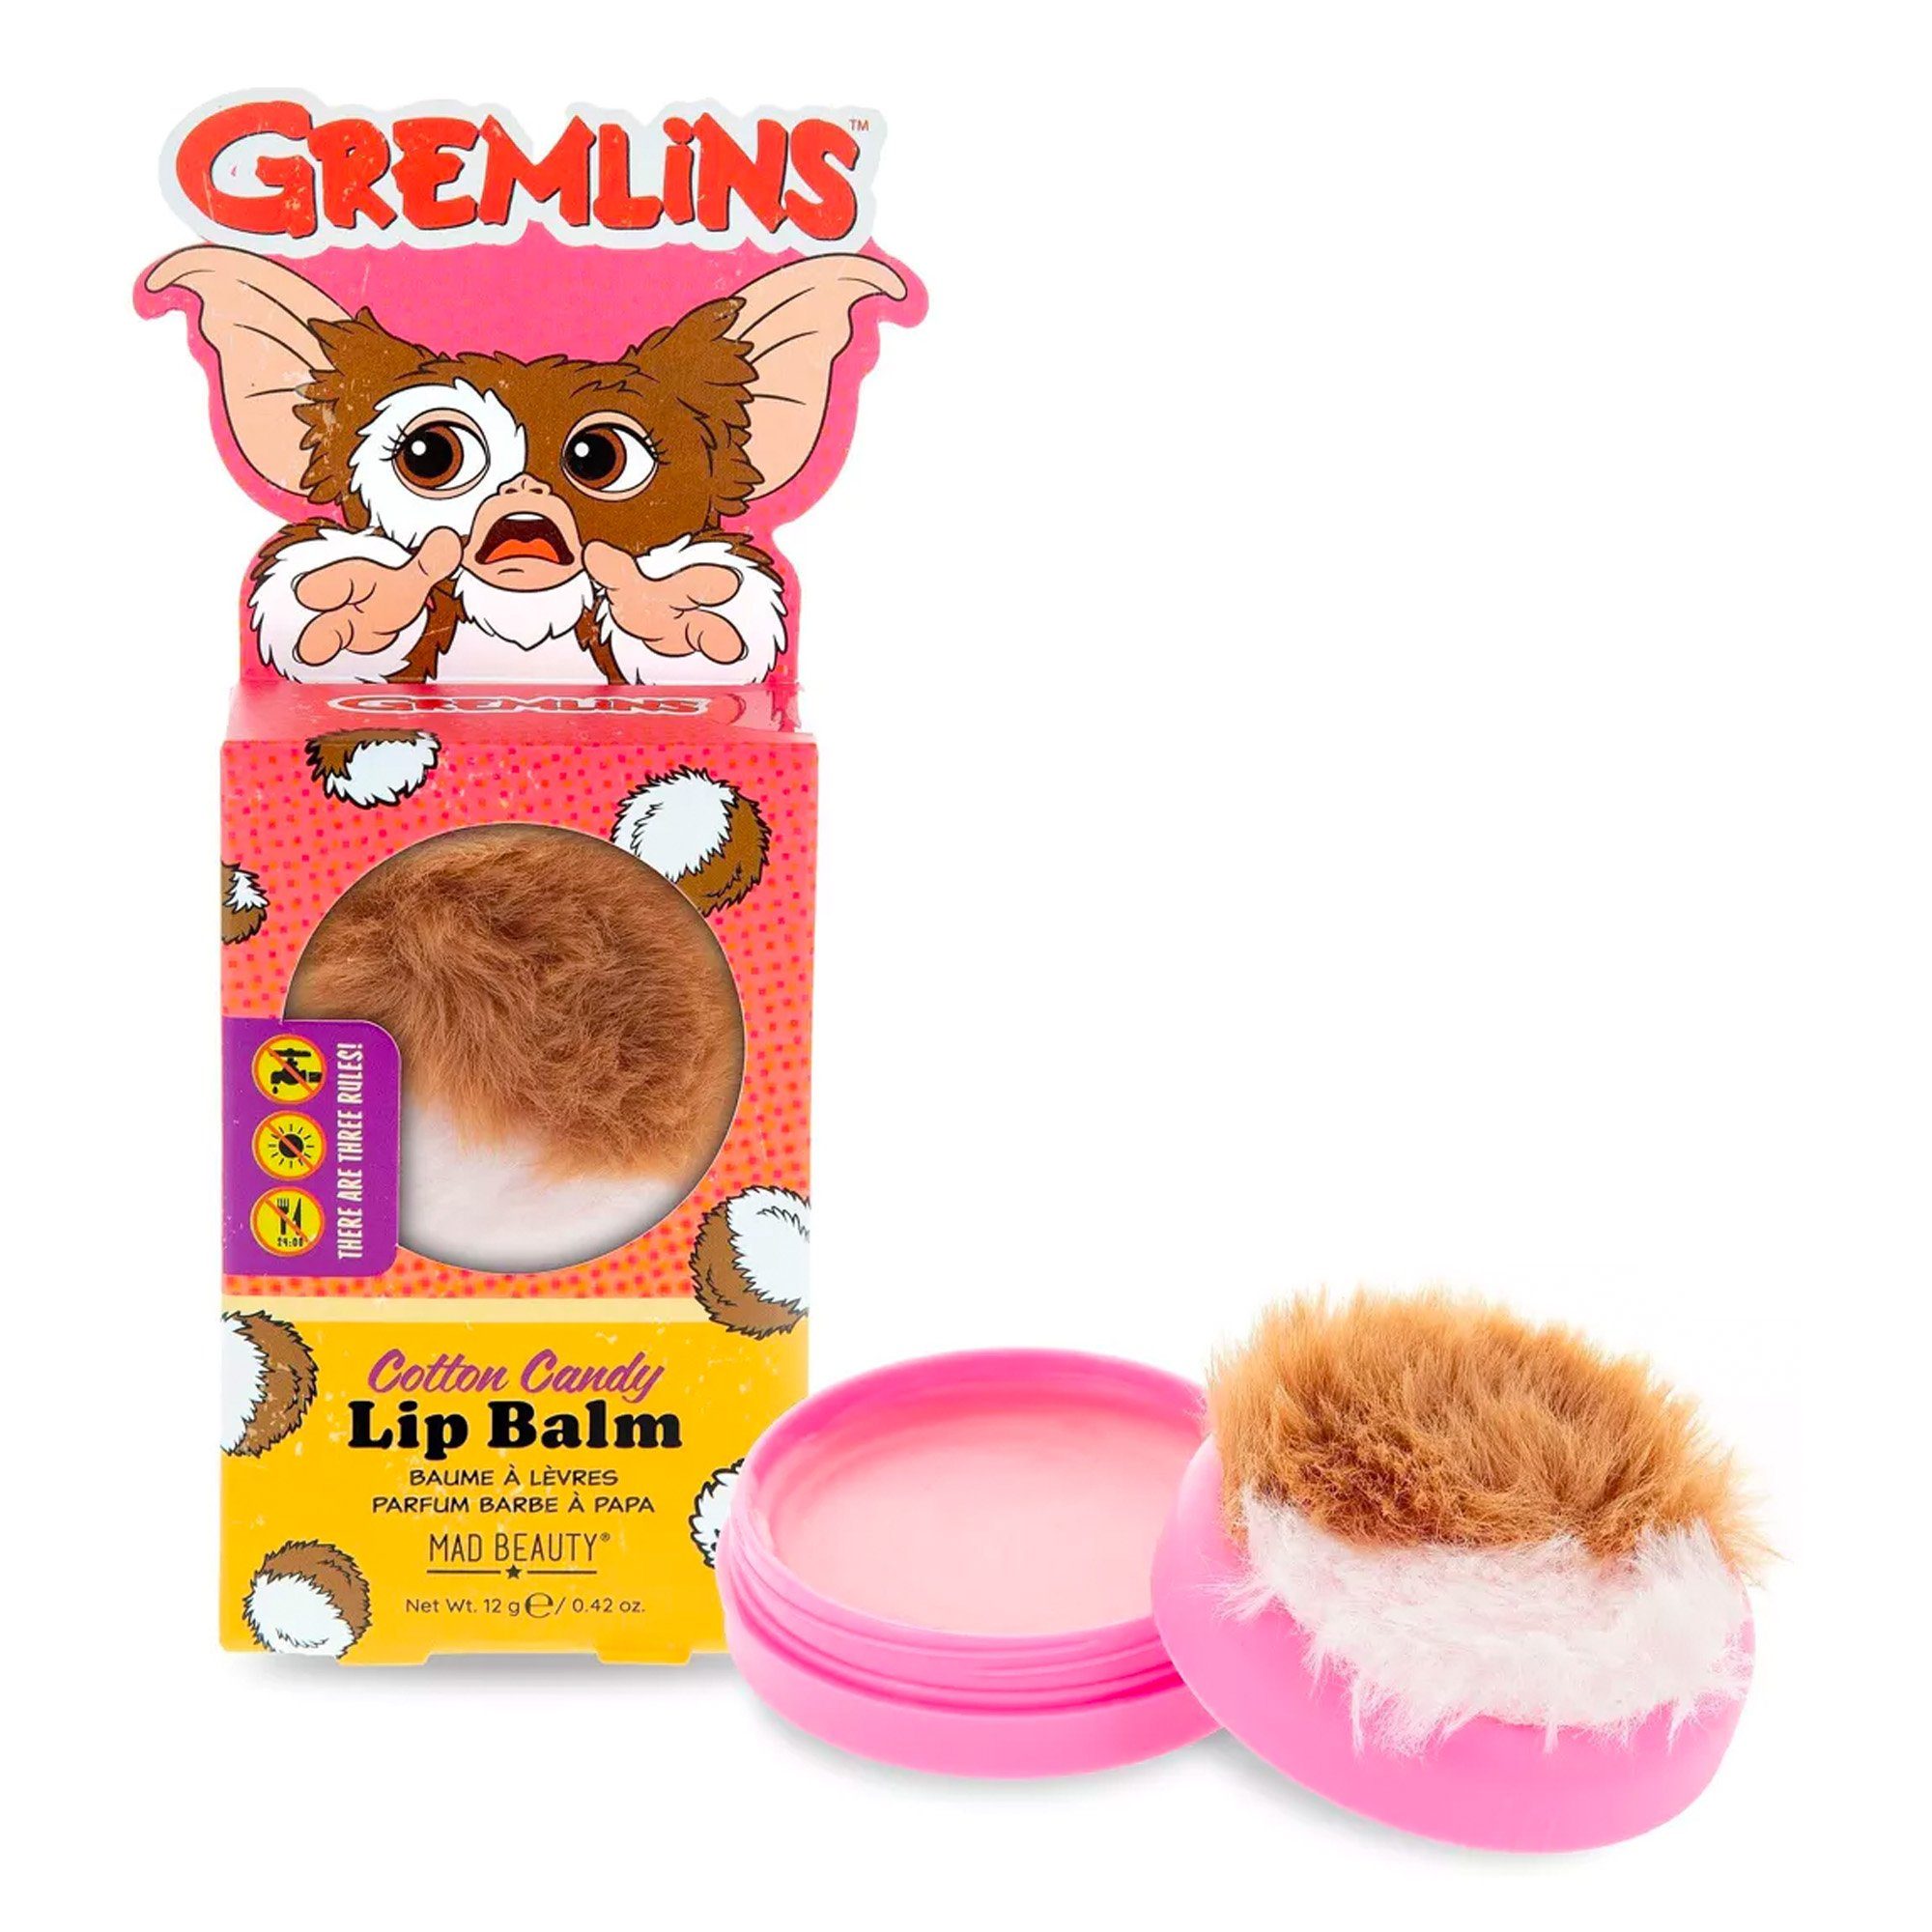 Gremlins Beauty Lippenbalsam Candy Mad Cotton